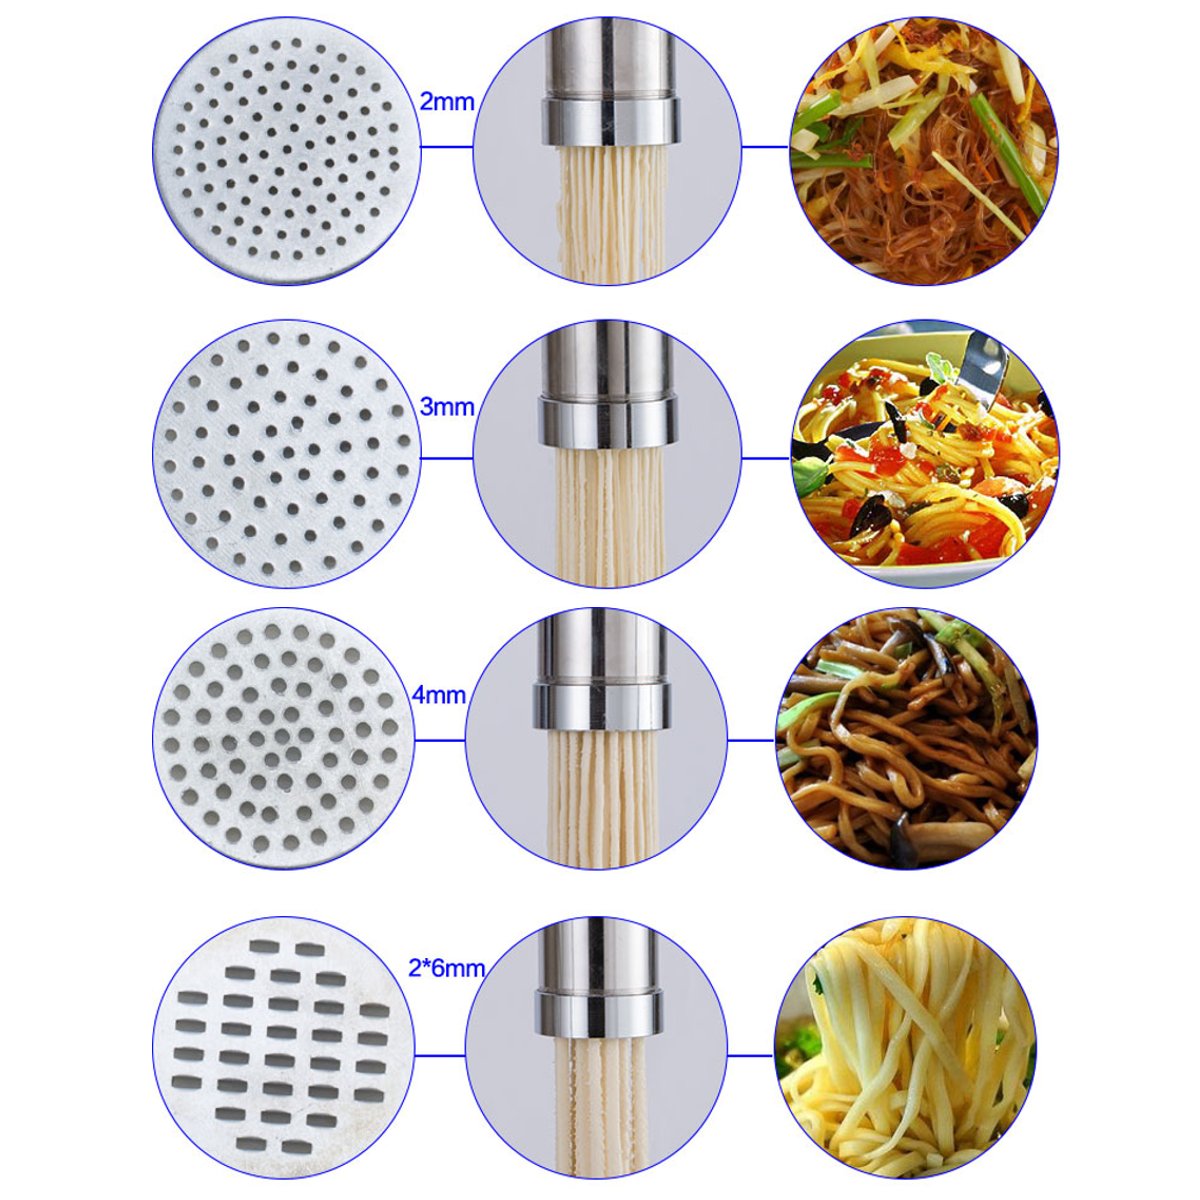 Stainless-Steel-Noodle-Pasta-Maker-Noodle-Manual-Press-Machine-Home-Pasta-Cutter-1555868